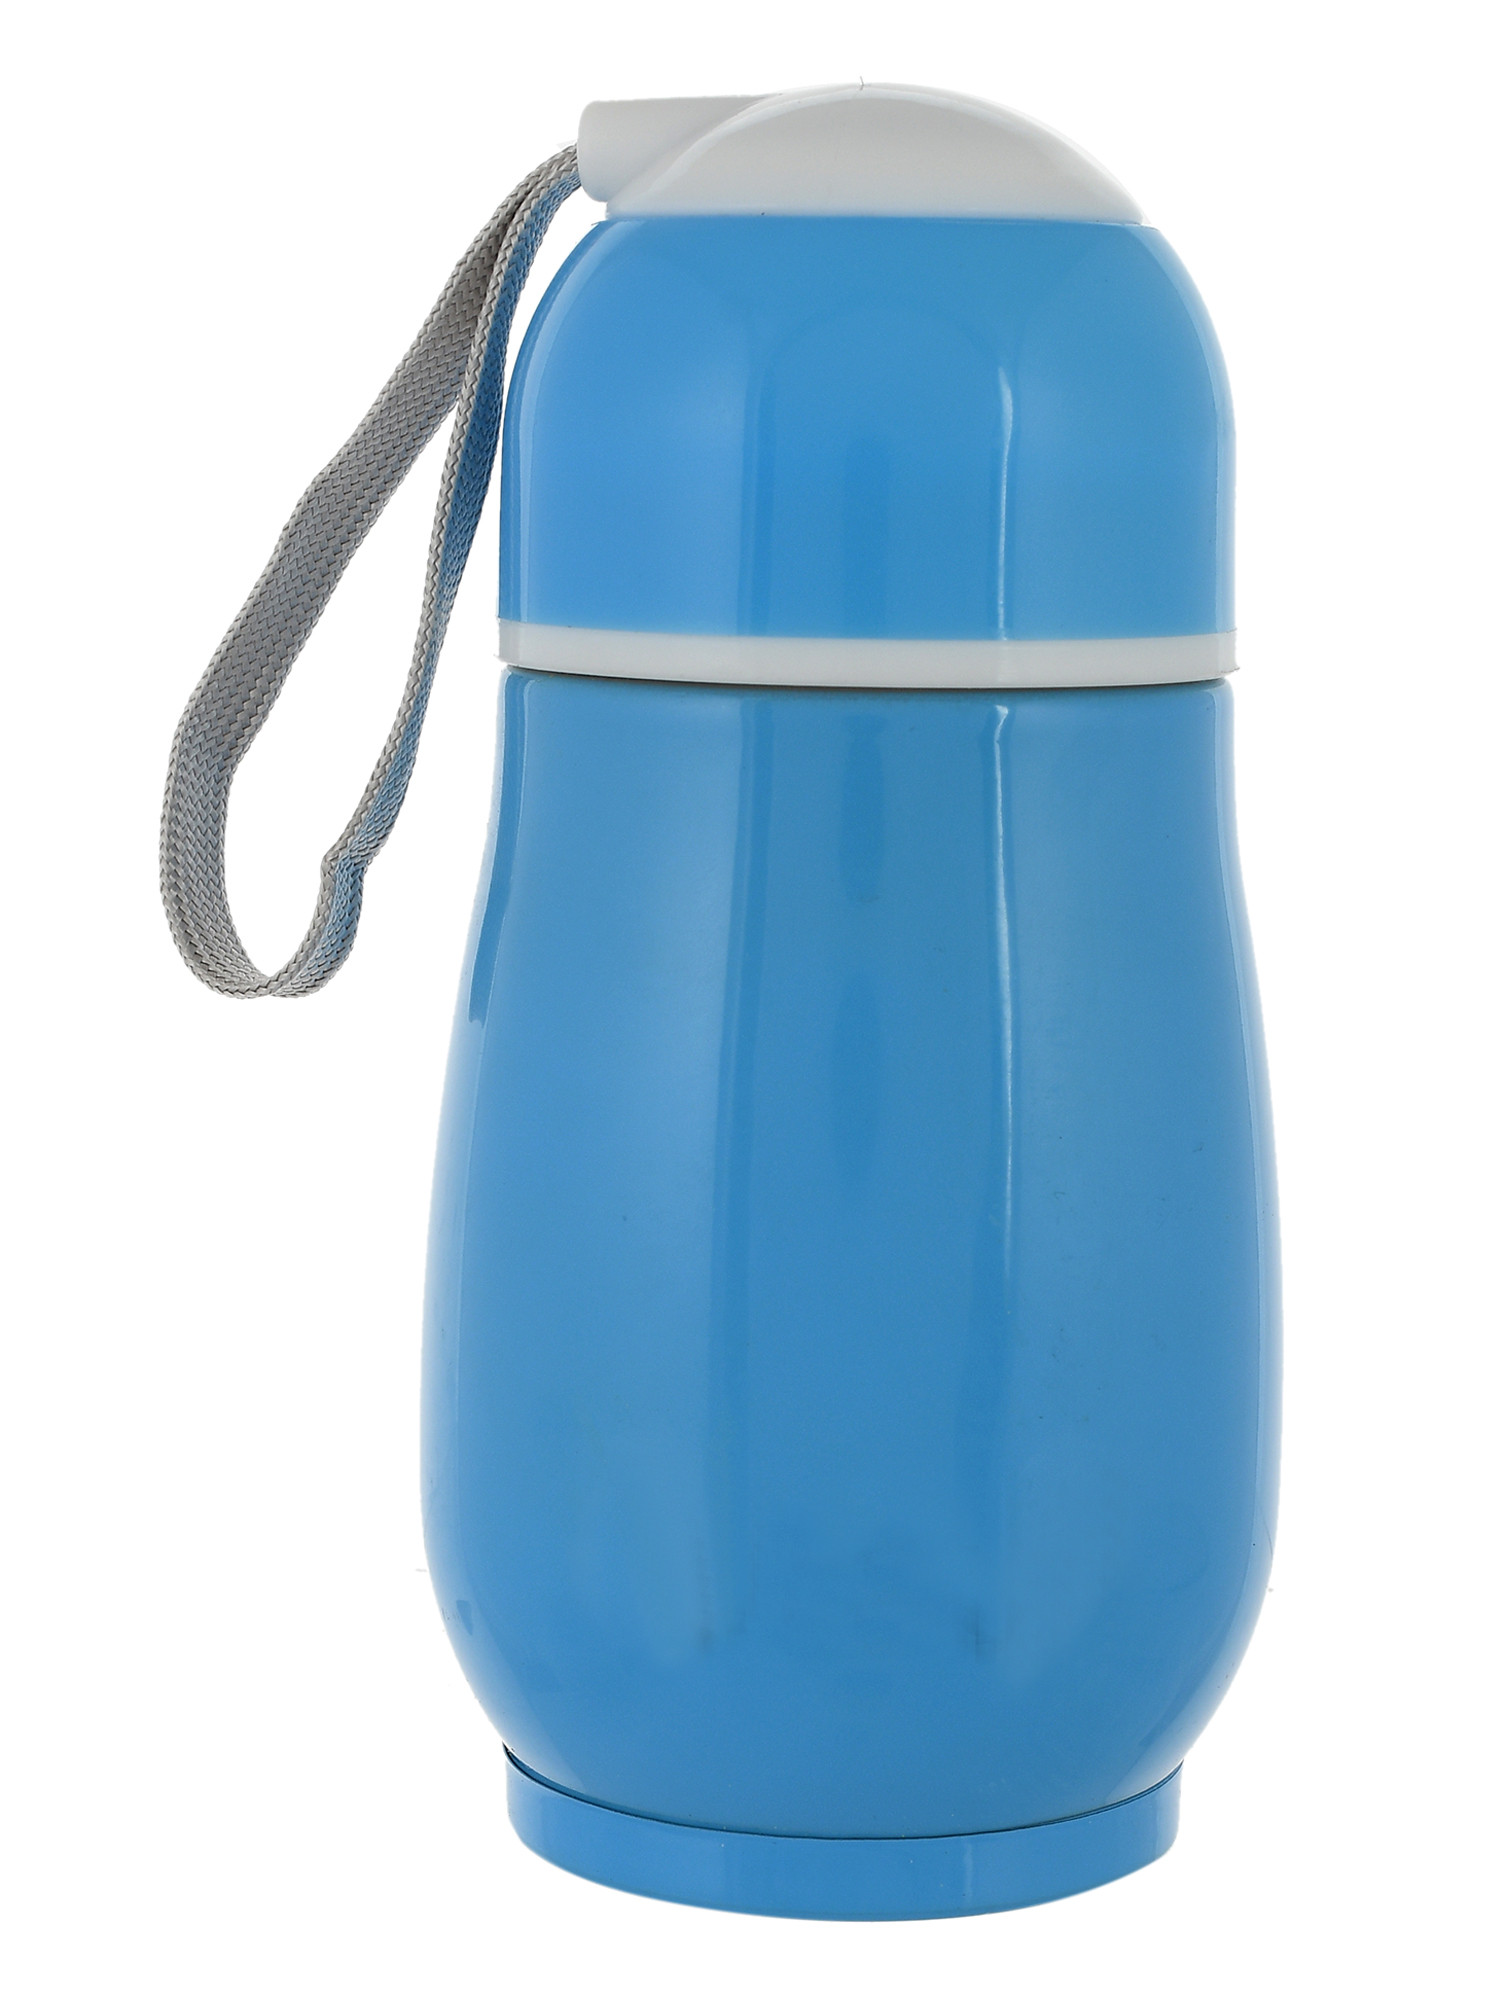 Kuber Industries Small Stainless Steel Hot & Cold Vacuum Thermos Travel Mug Tea Water Bottle Coffee Flask, 300ml (Sky Blue)